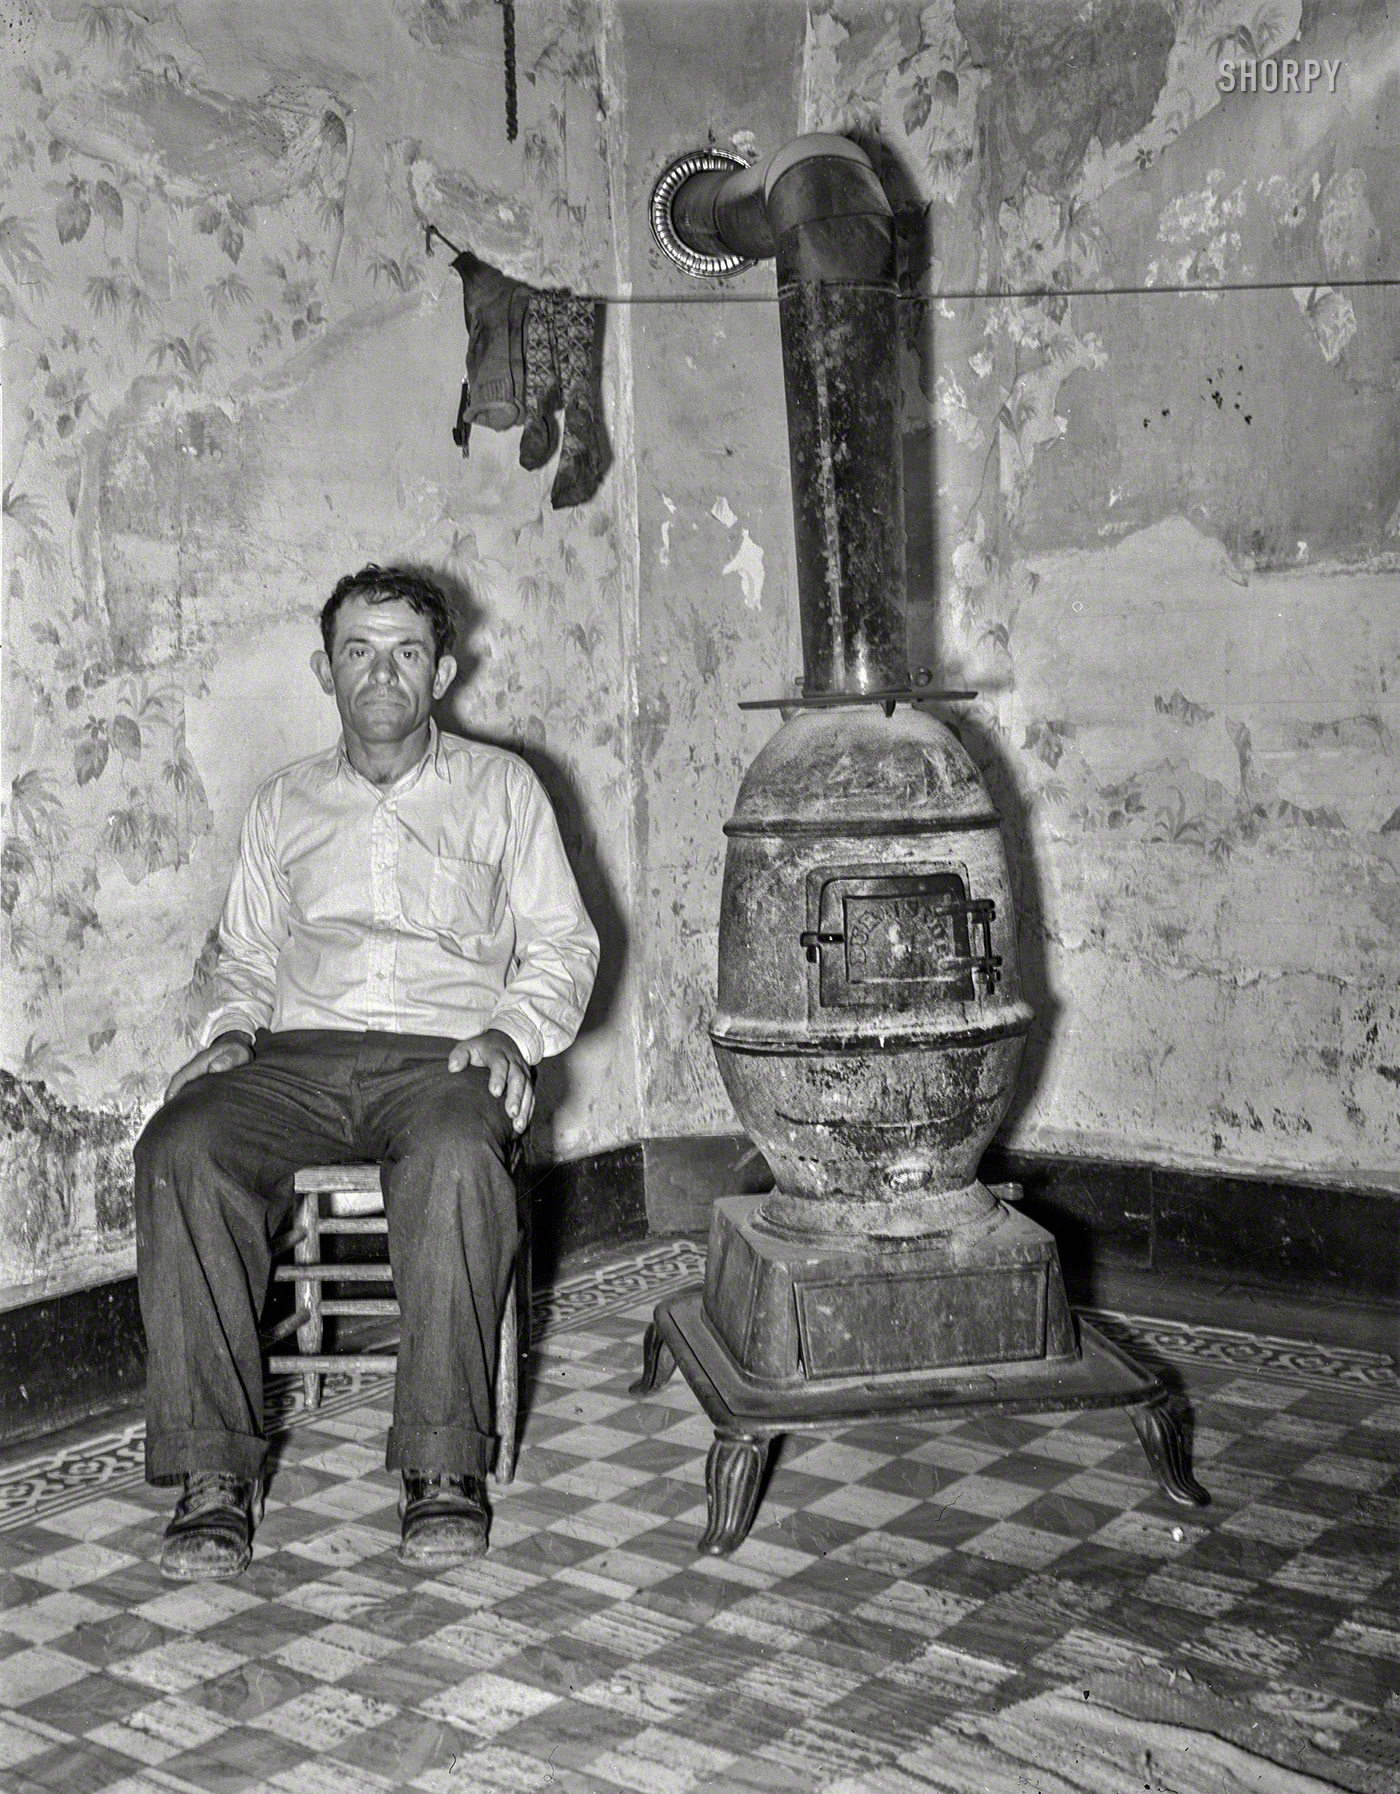 "Coal miner during May 1939 strike. Kempton, West Virginia." 4x5 acetate negative by John Vachon for the Resettlement Administration. View full size.